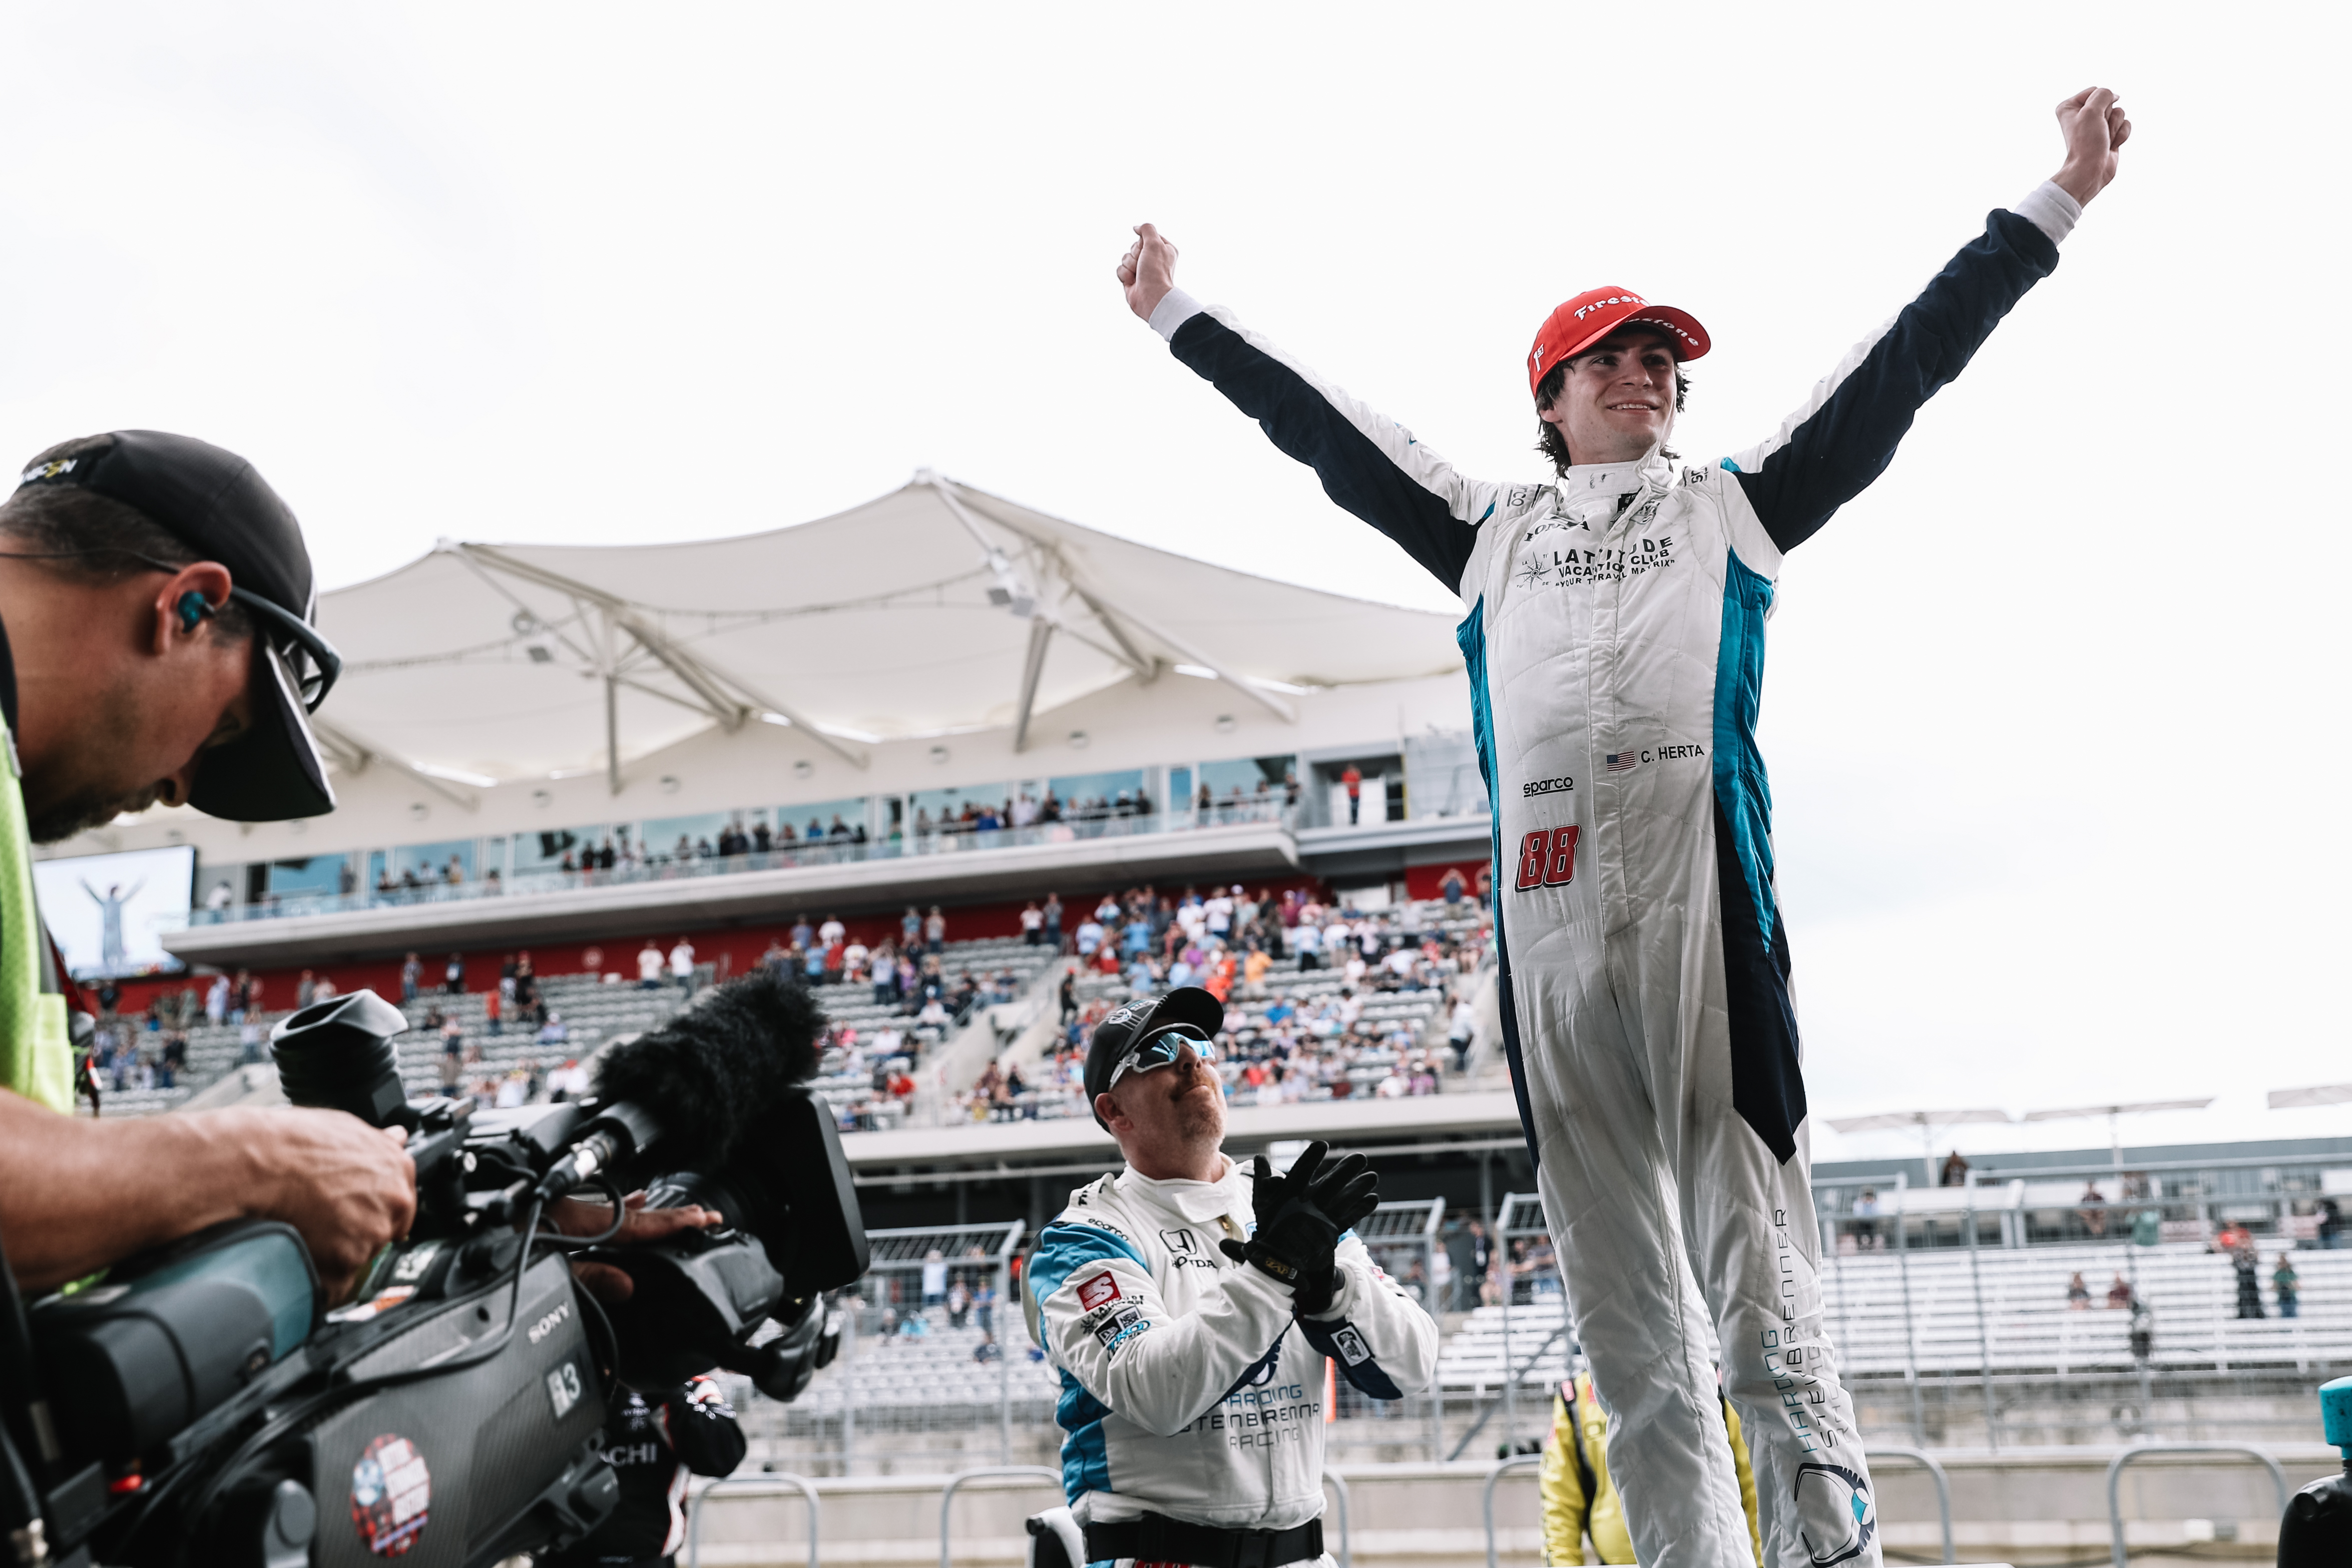 Herta's Win Makes History in First NTT IndyCar Series Race at COTA